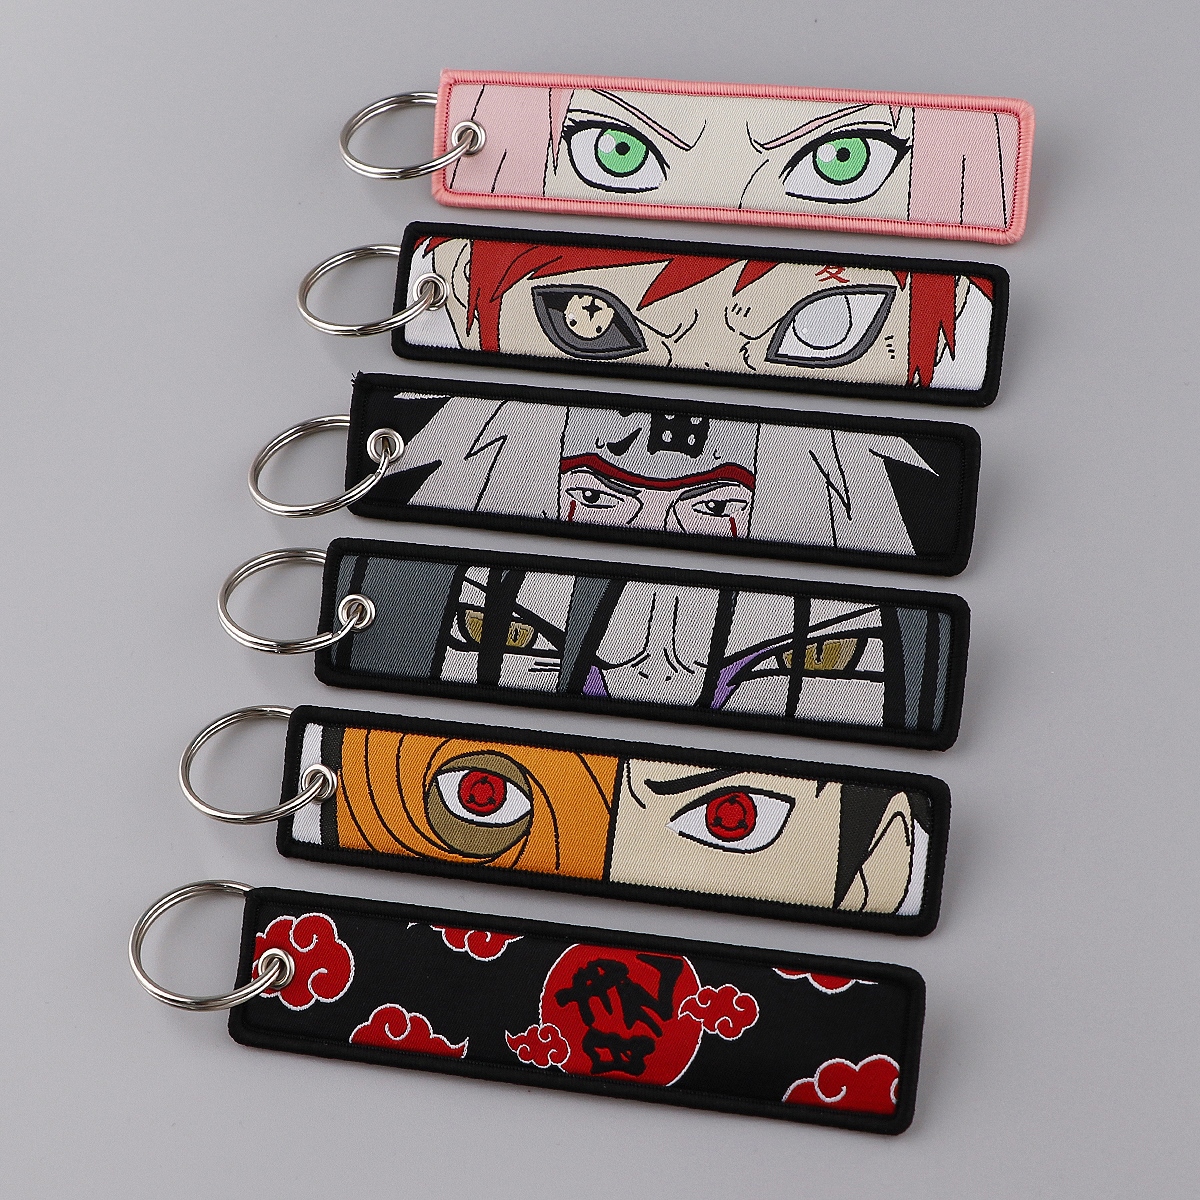 Cool Anime Naruto Macbook Casing for New Air Pro 13 Covers M1 2020 Models,  Computers & Tech, Parts & Accessories, Other Accessories on Carousell